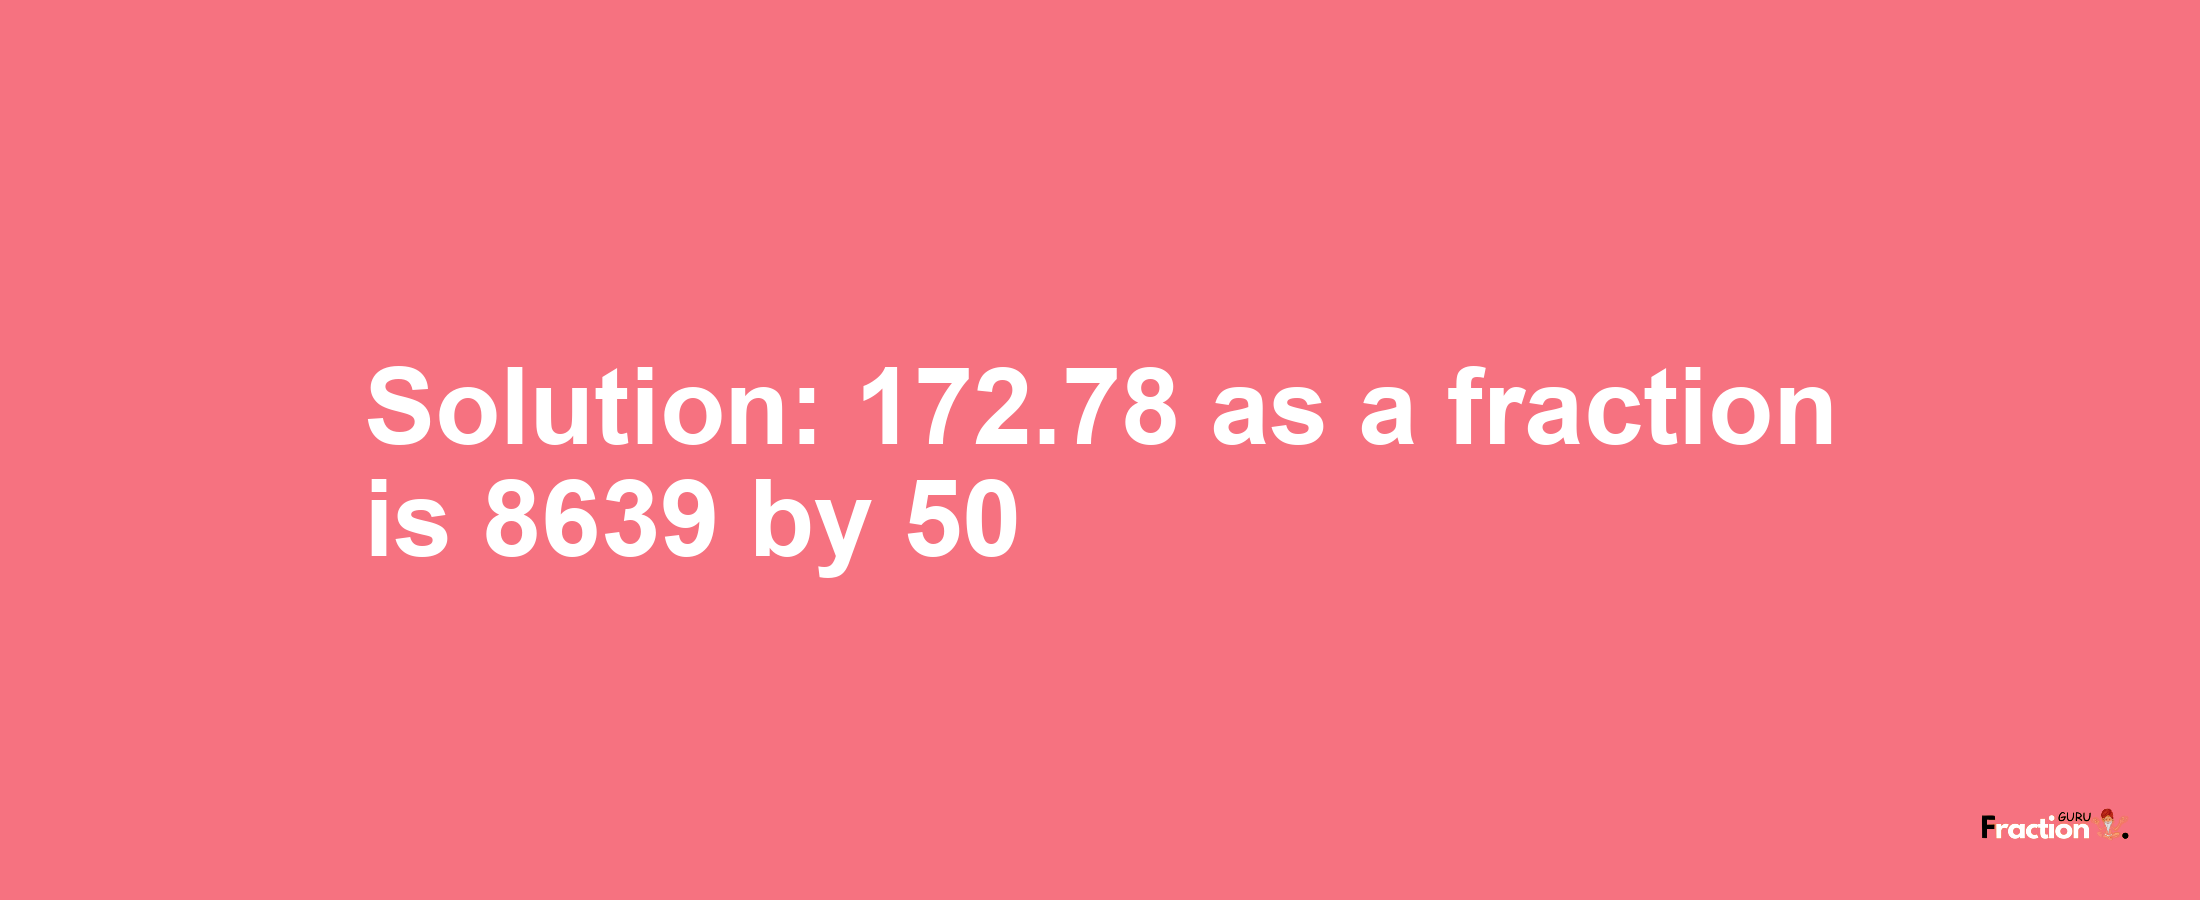 Solution:172.78 as a fraction is 8639/50